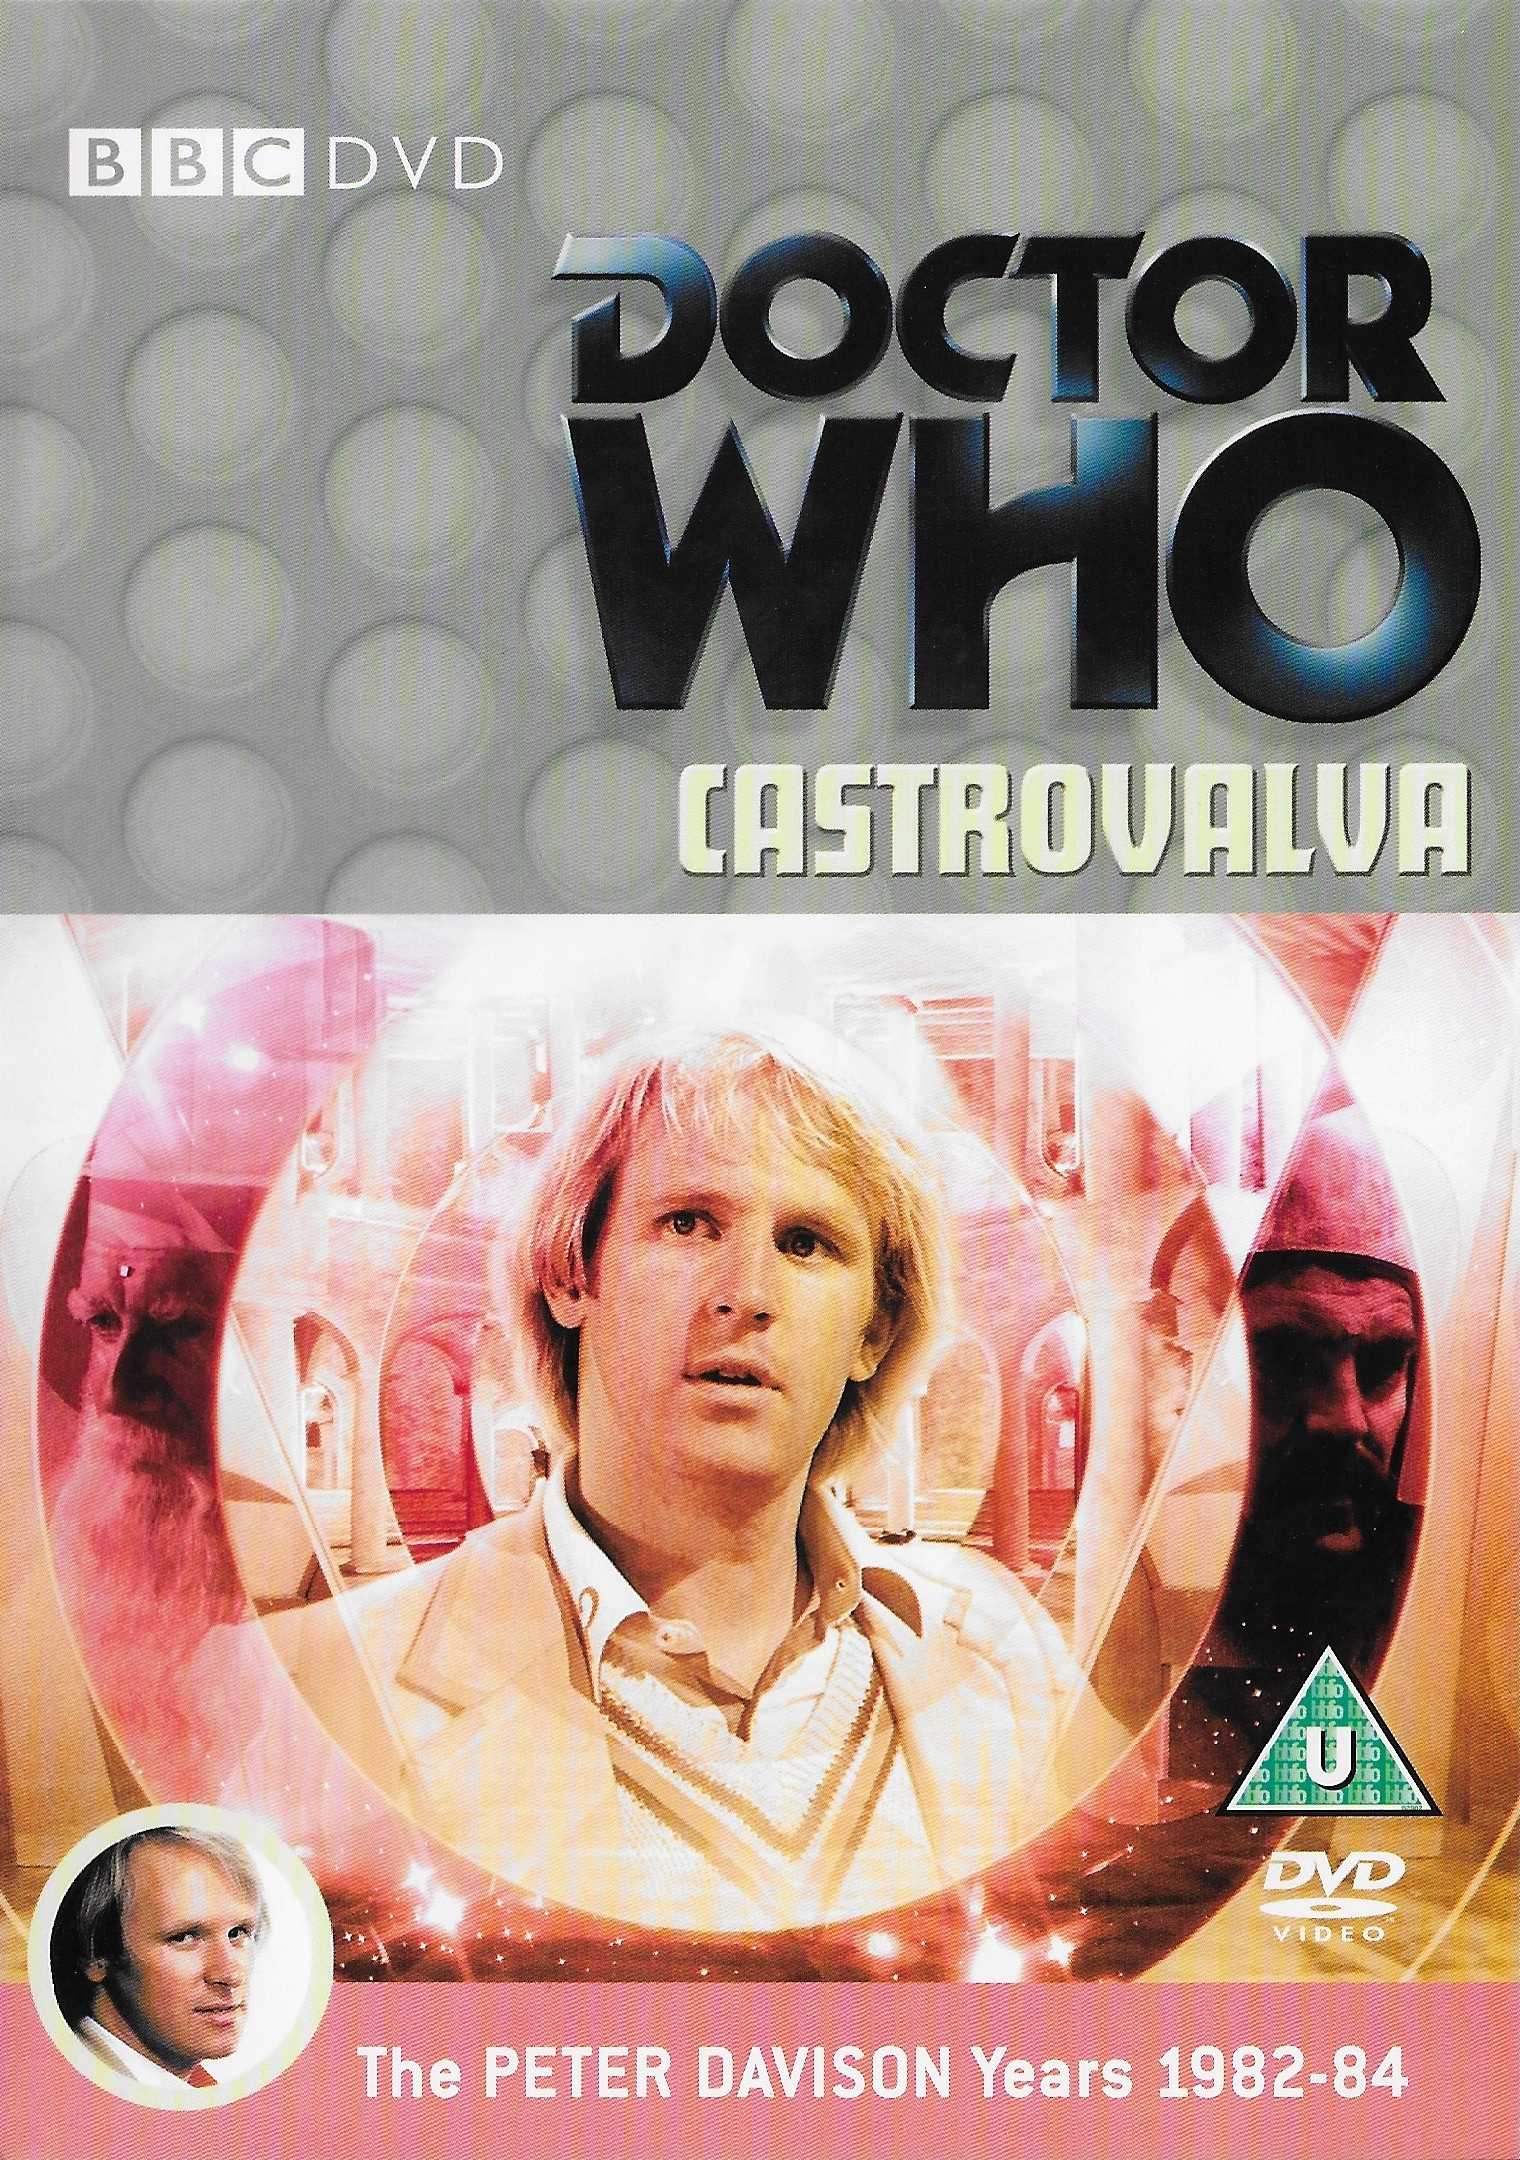 Picture of BBCDVD 1331C Doctor Who - Castrovalva by artist Christopher H Bidmead from the BBC records and Tapes library